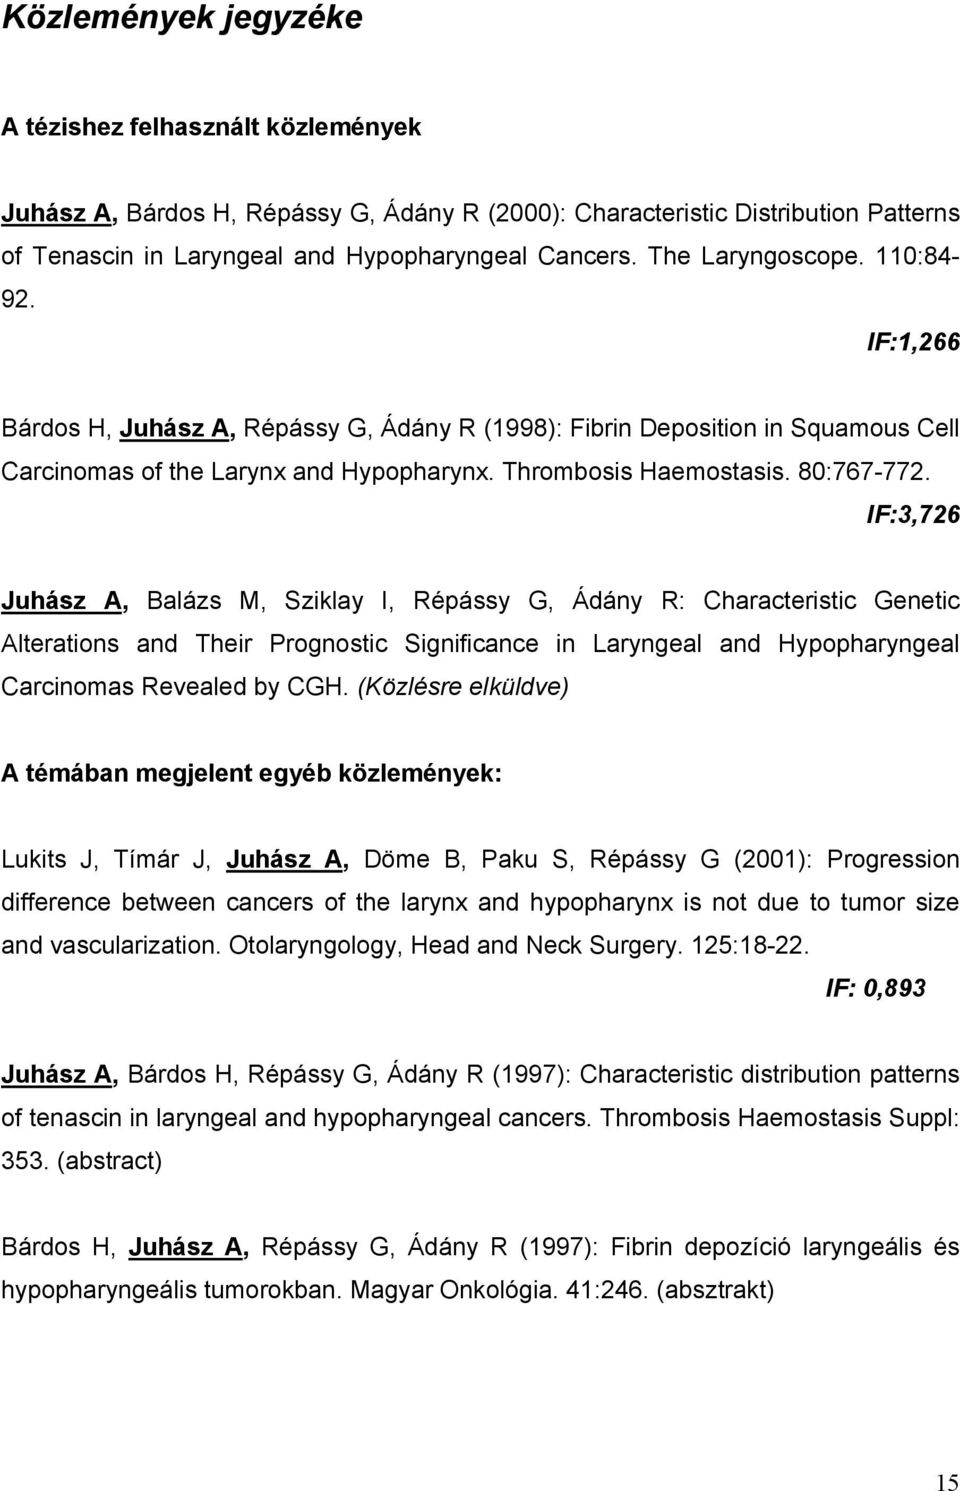 IF:3,726 Juhász A, Balázs M, Sziklay I, Répássy G, Ádány R: Characteristic Genetic Alterations and Their Prognostic Significance in Laryngeal and Hypopharyngeal Carcinomas Revealed by CGH.